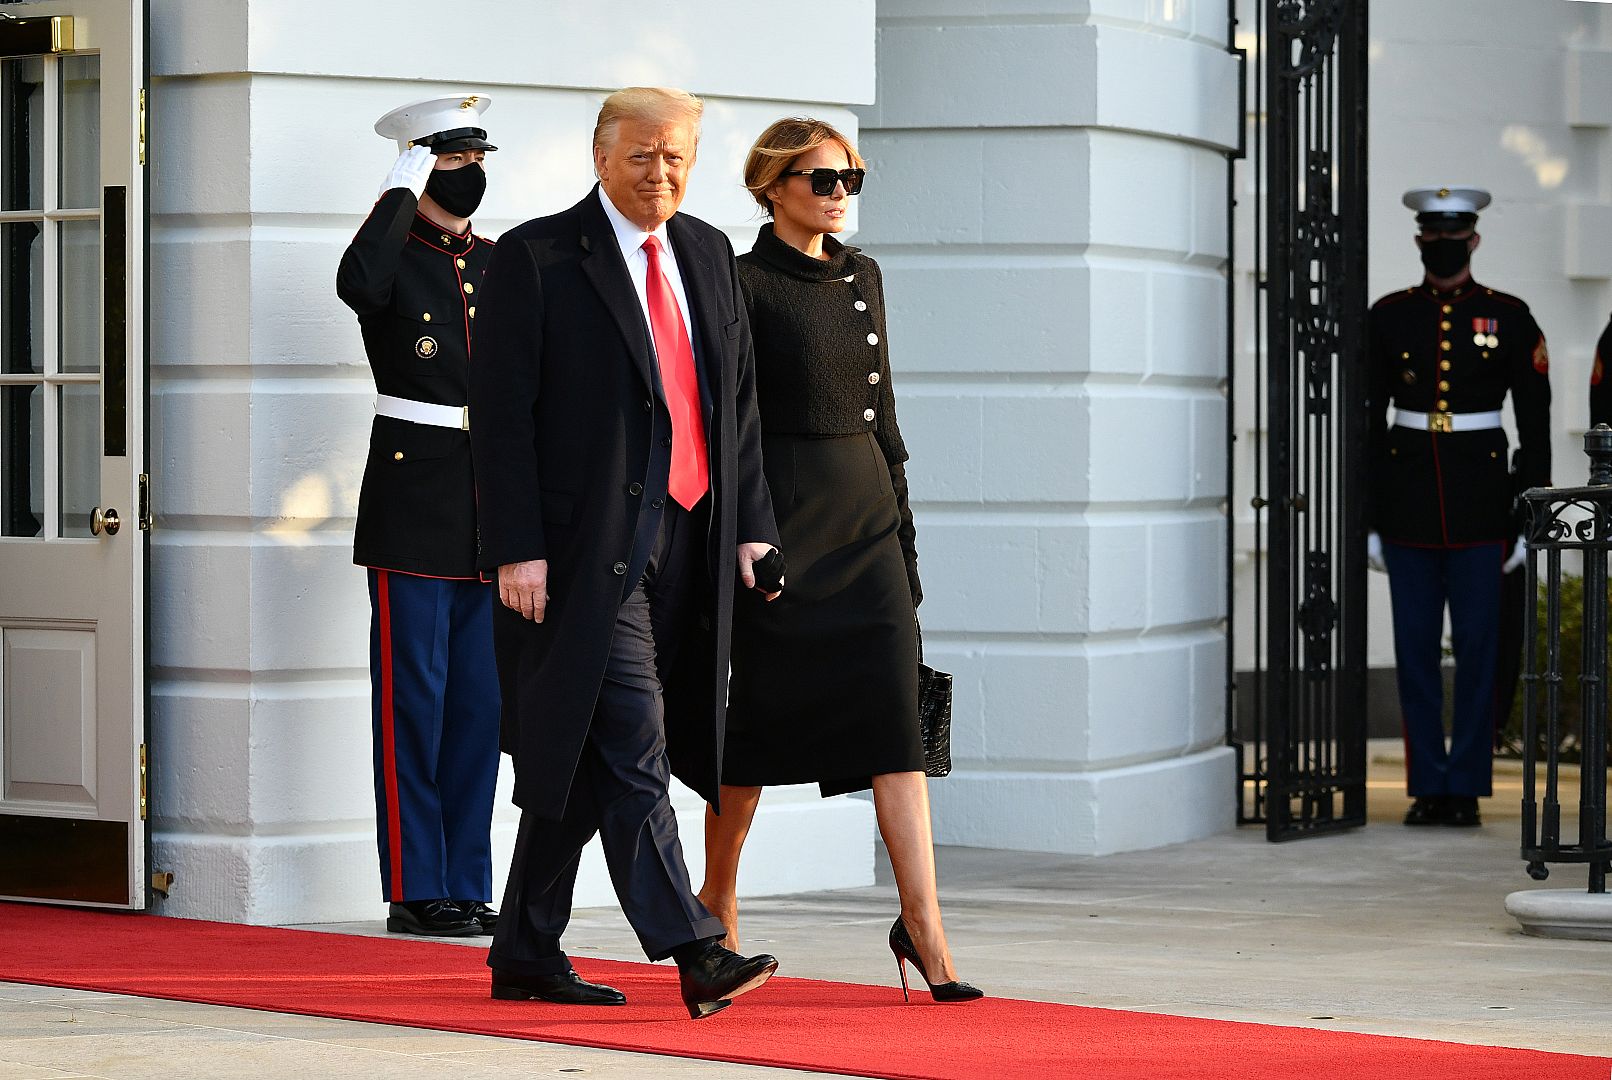 US President Donald Trump and First Lady Melania make their way to board Marine One before departing from the South Lawn of the White House in Washington, DC on January 20, 20